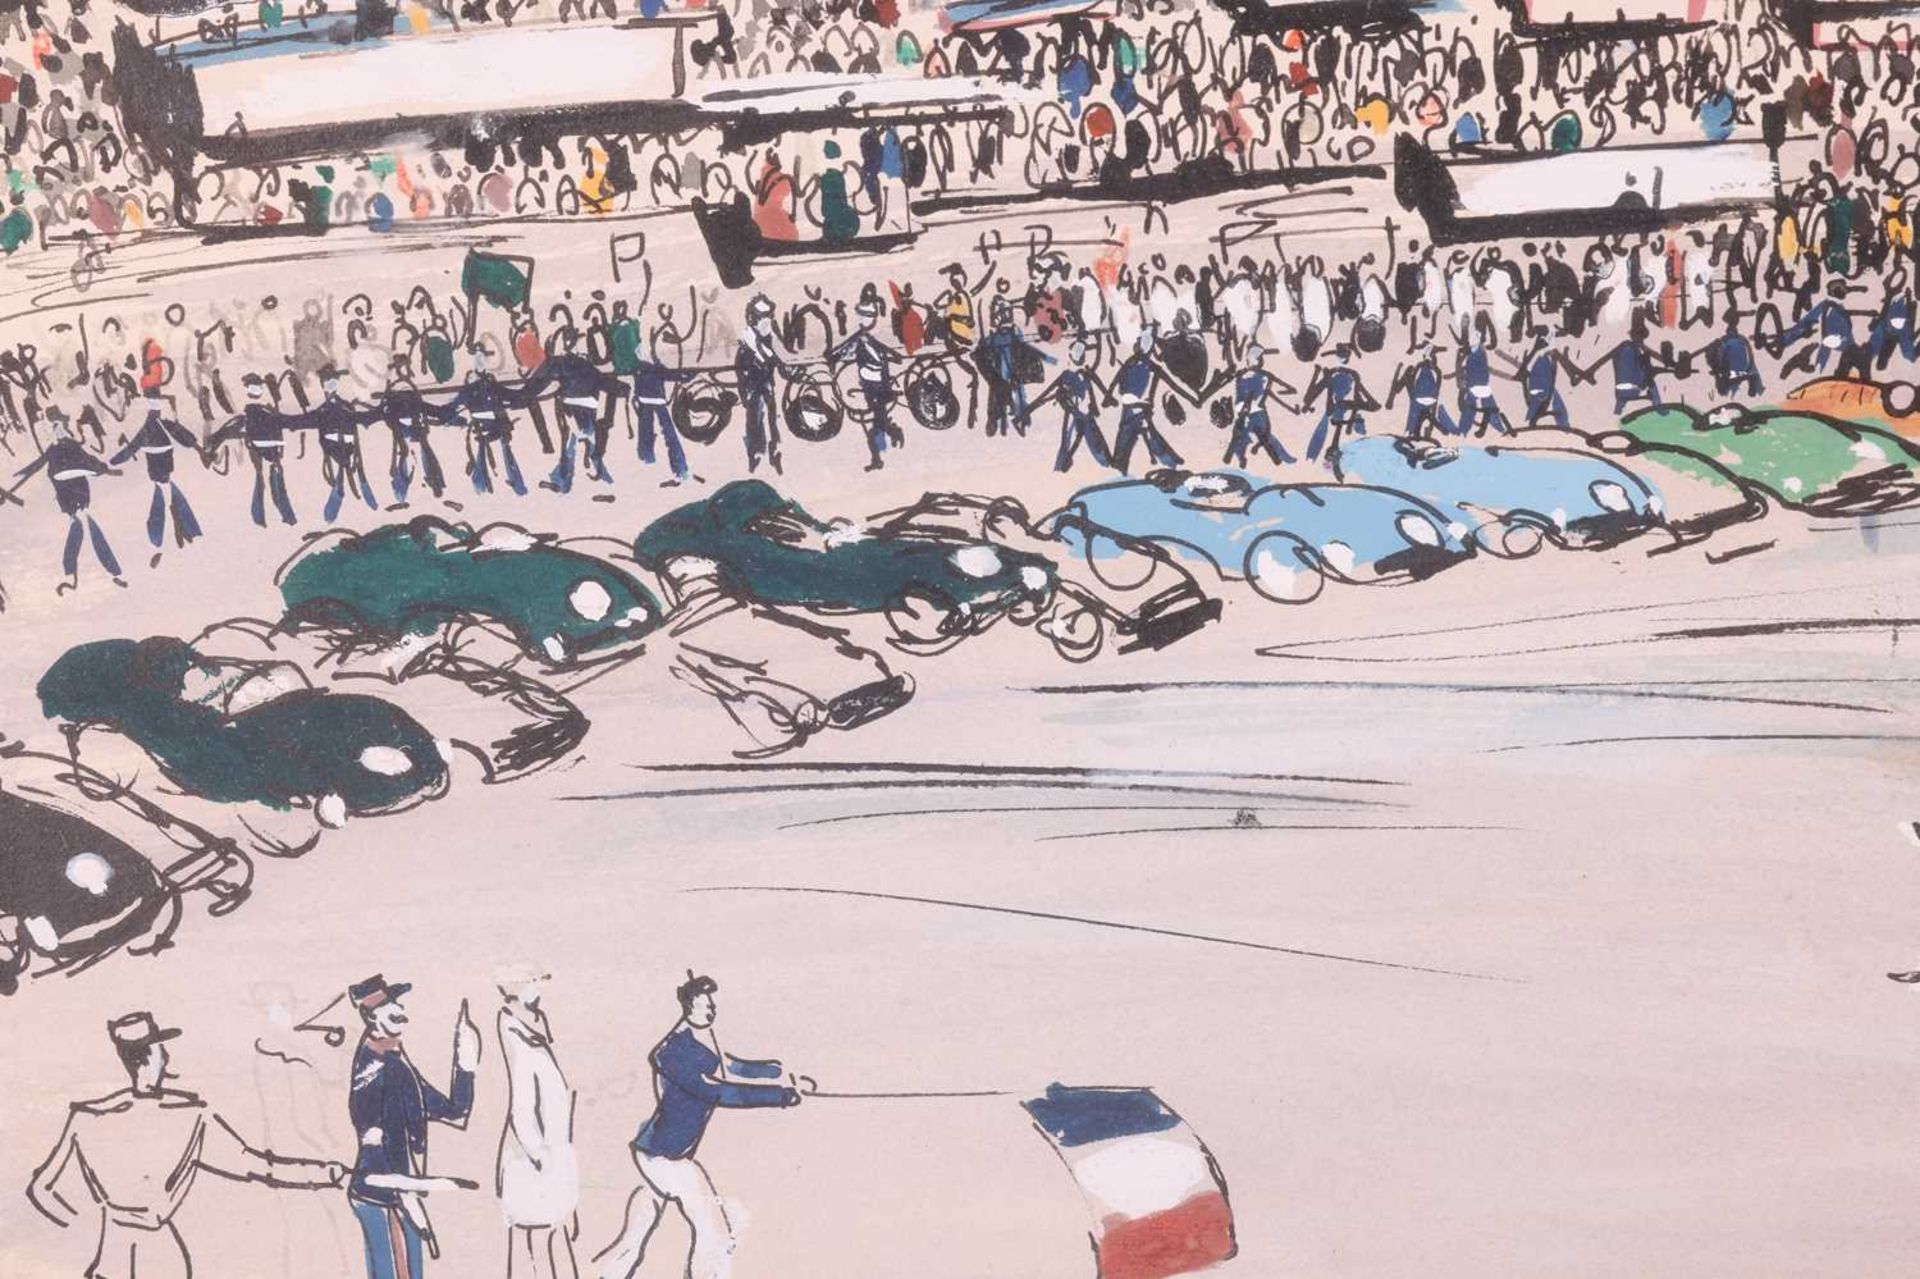 John Paddy Carstairs (1916 - 1970), 'Le Mans - The Start of the Race', signed 'John Paddy Carstairs' - Image 9 of 10